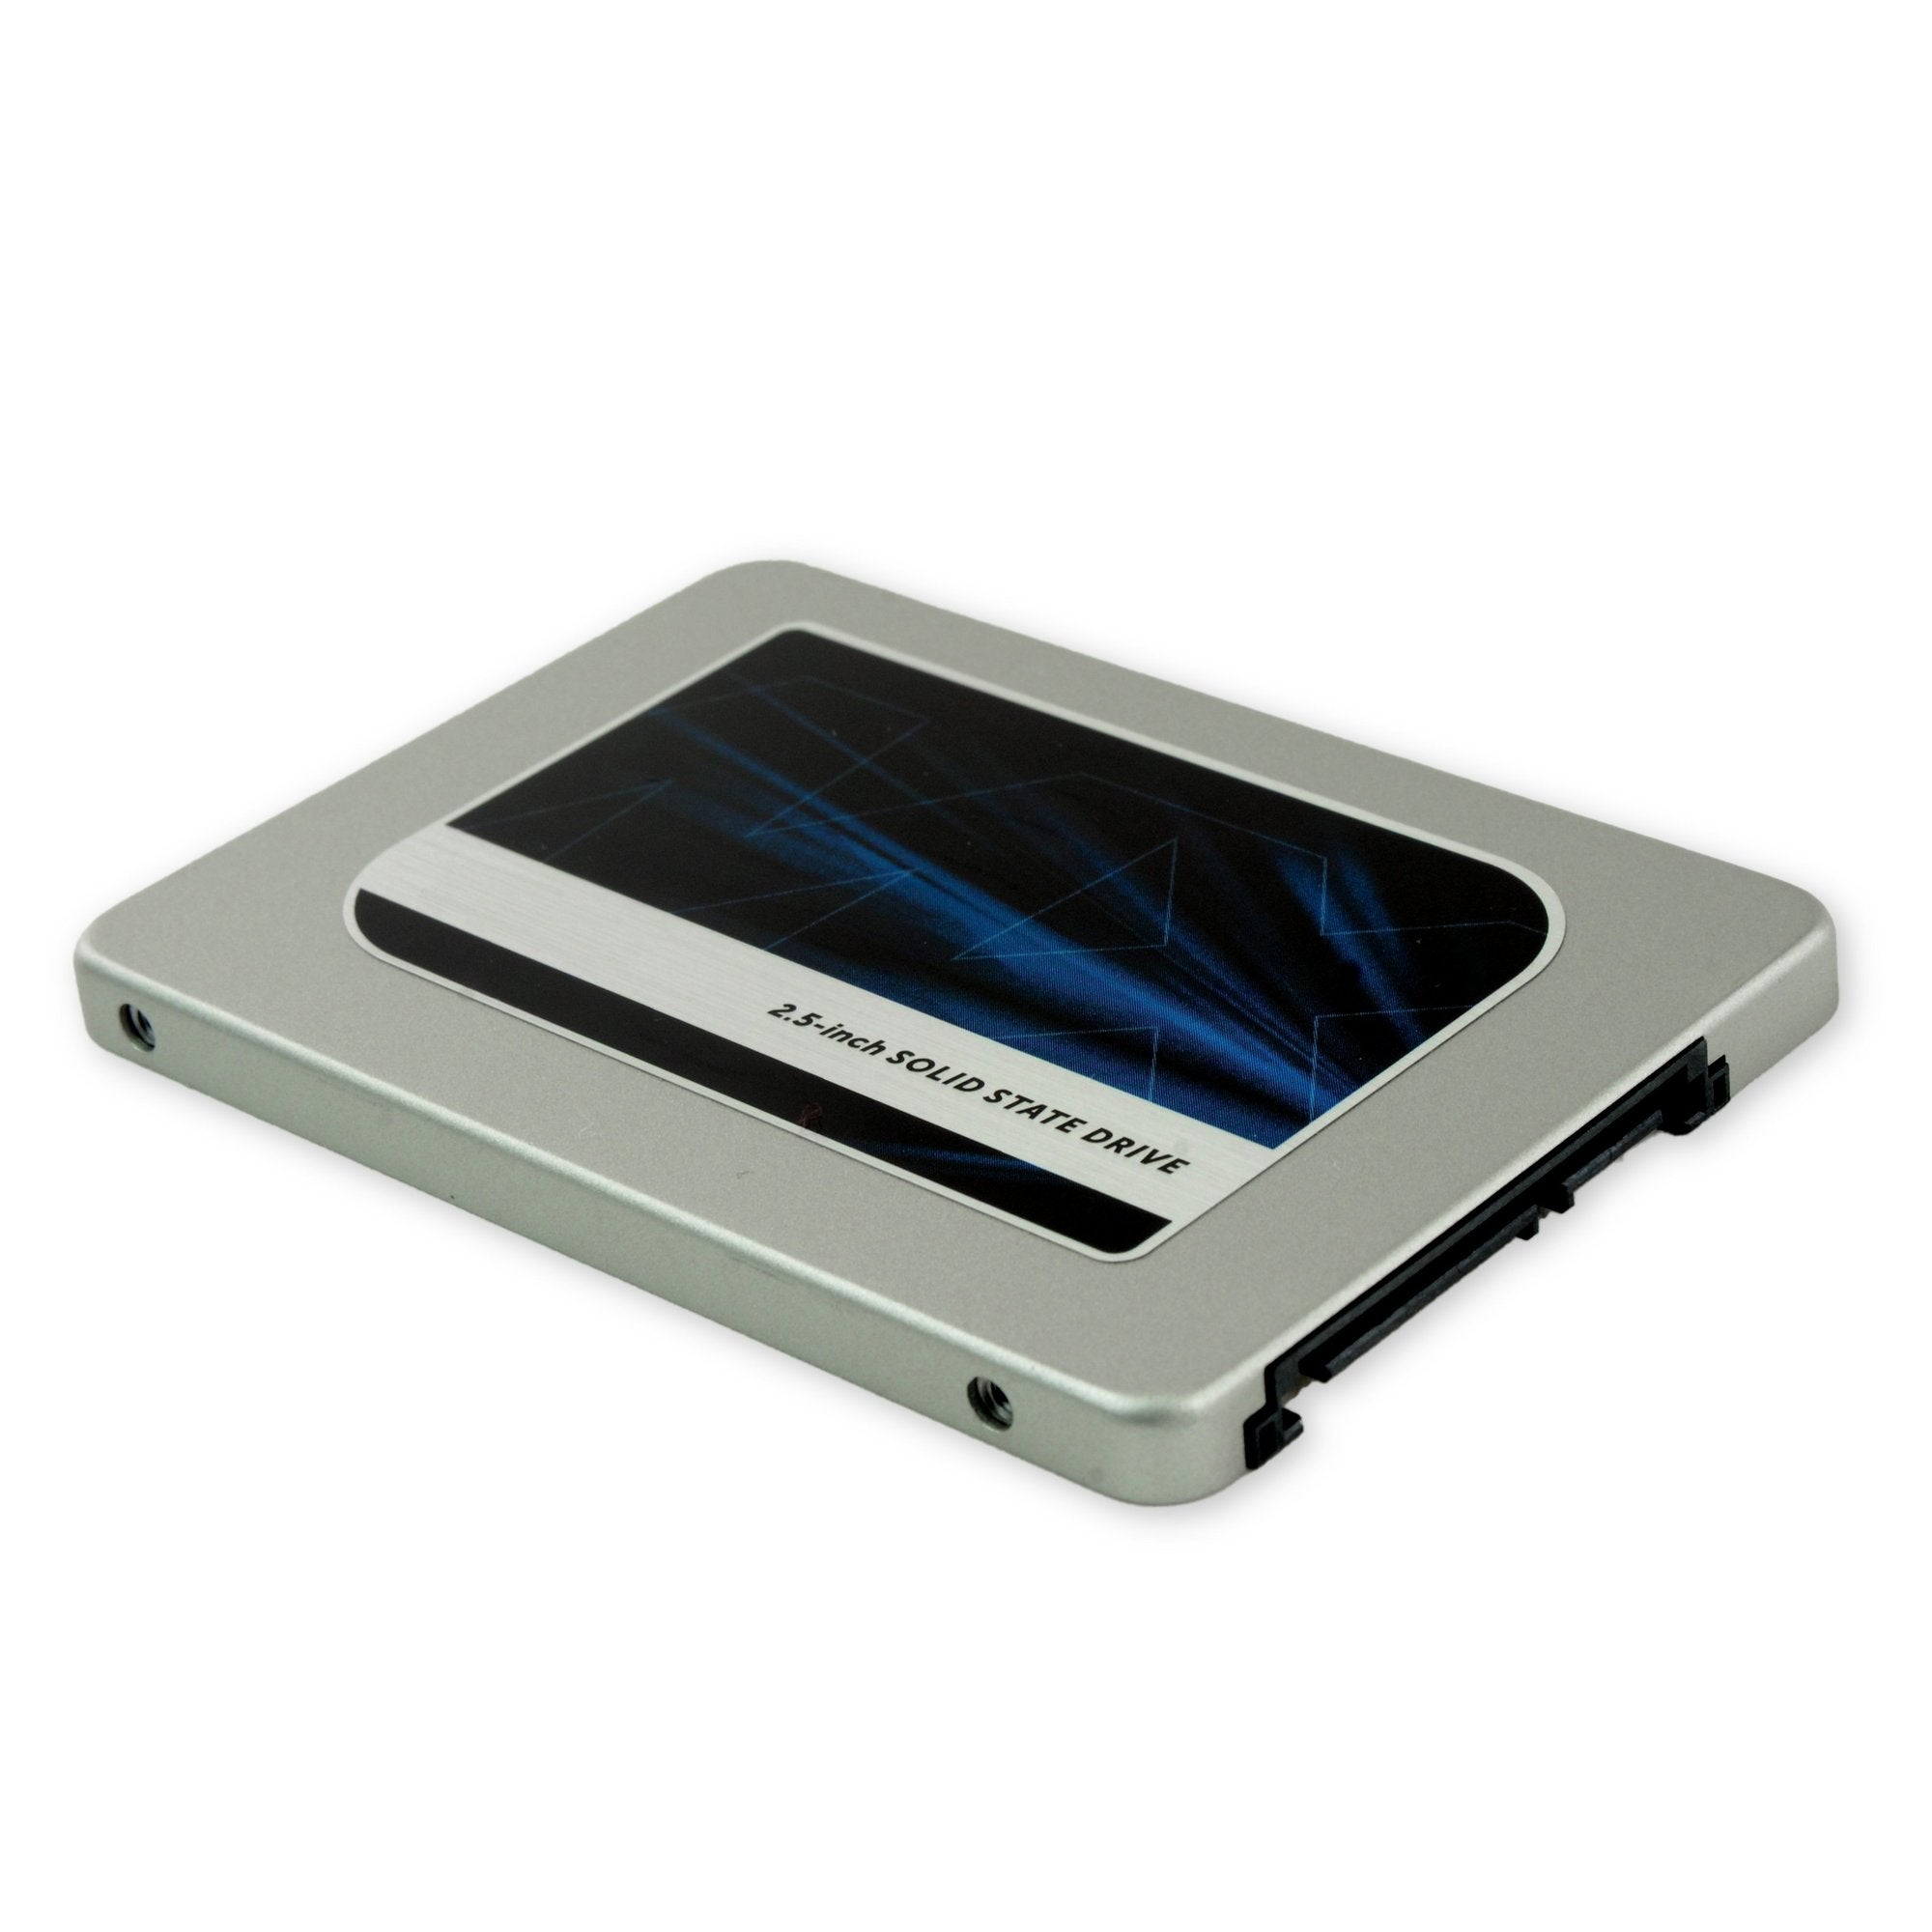 Crucial MX500 2 TB GB SSD Upgrade Kit - Including Guides and Tools